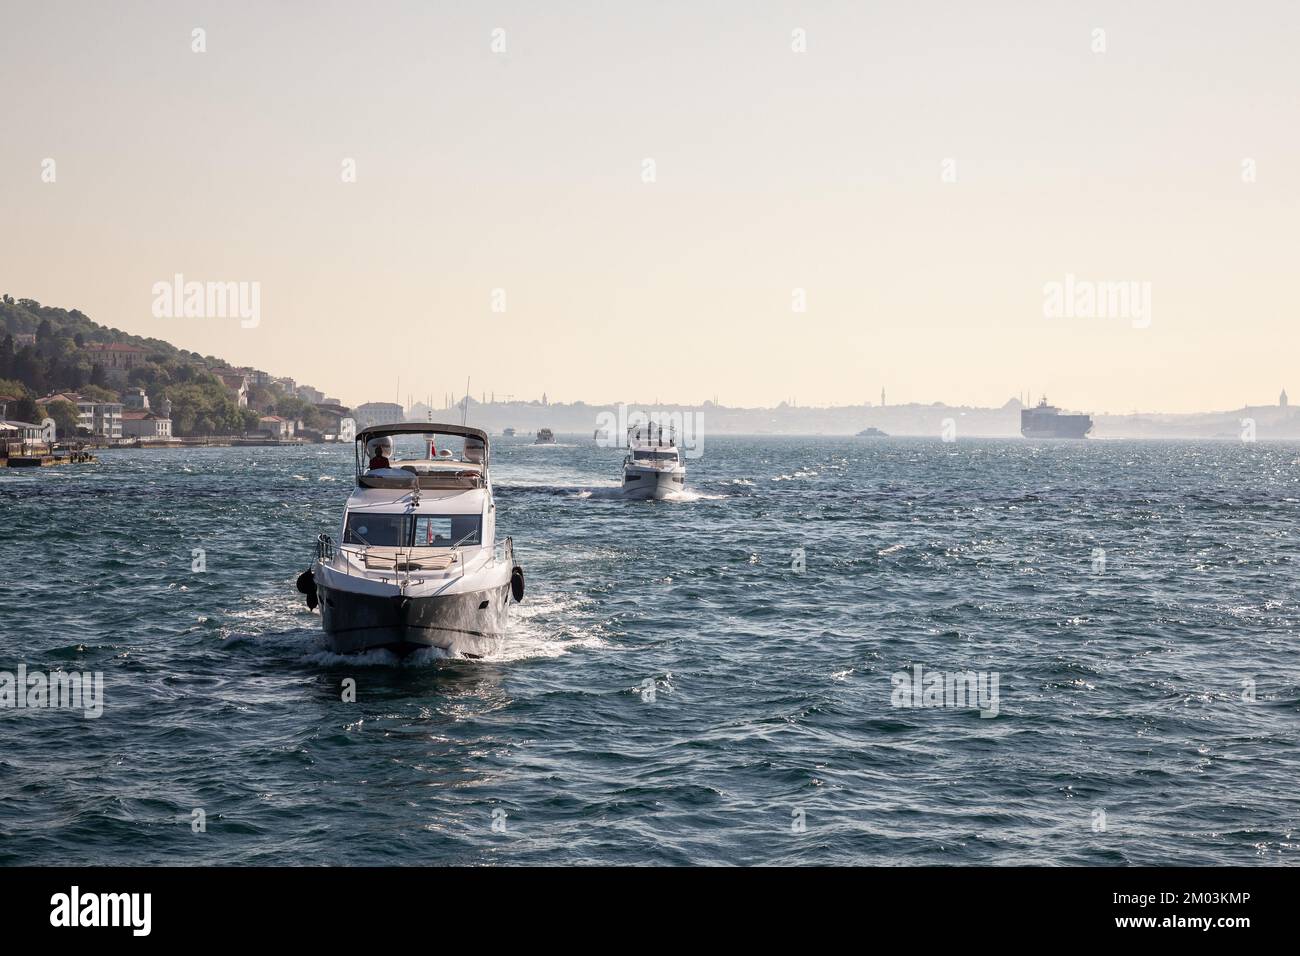 Picture of the Bosporus straight in Istanbul, Turkey, with luxury yachts cruising. Stock Photo